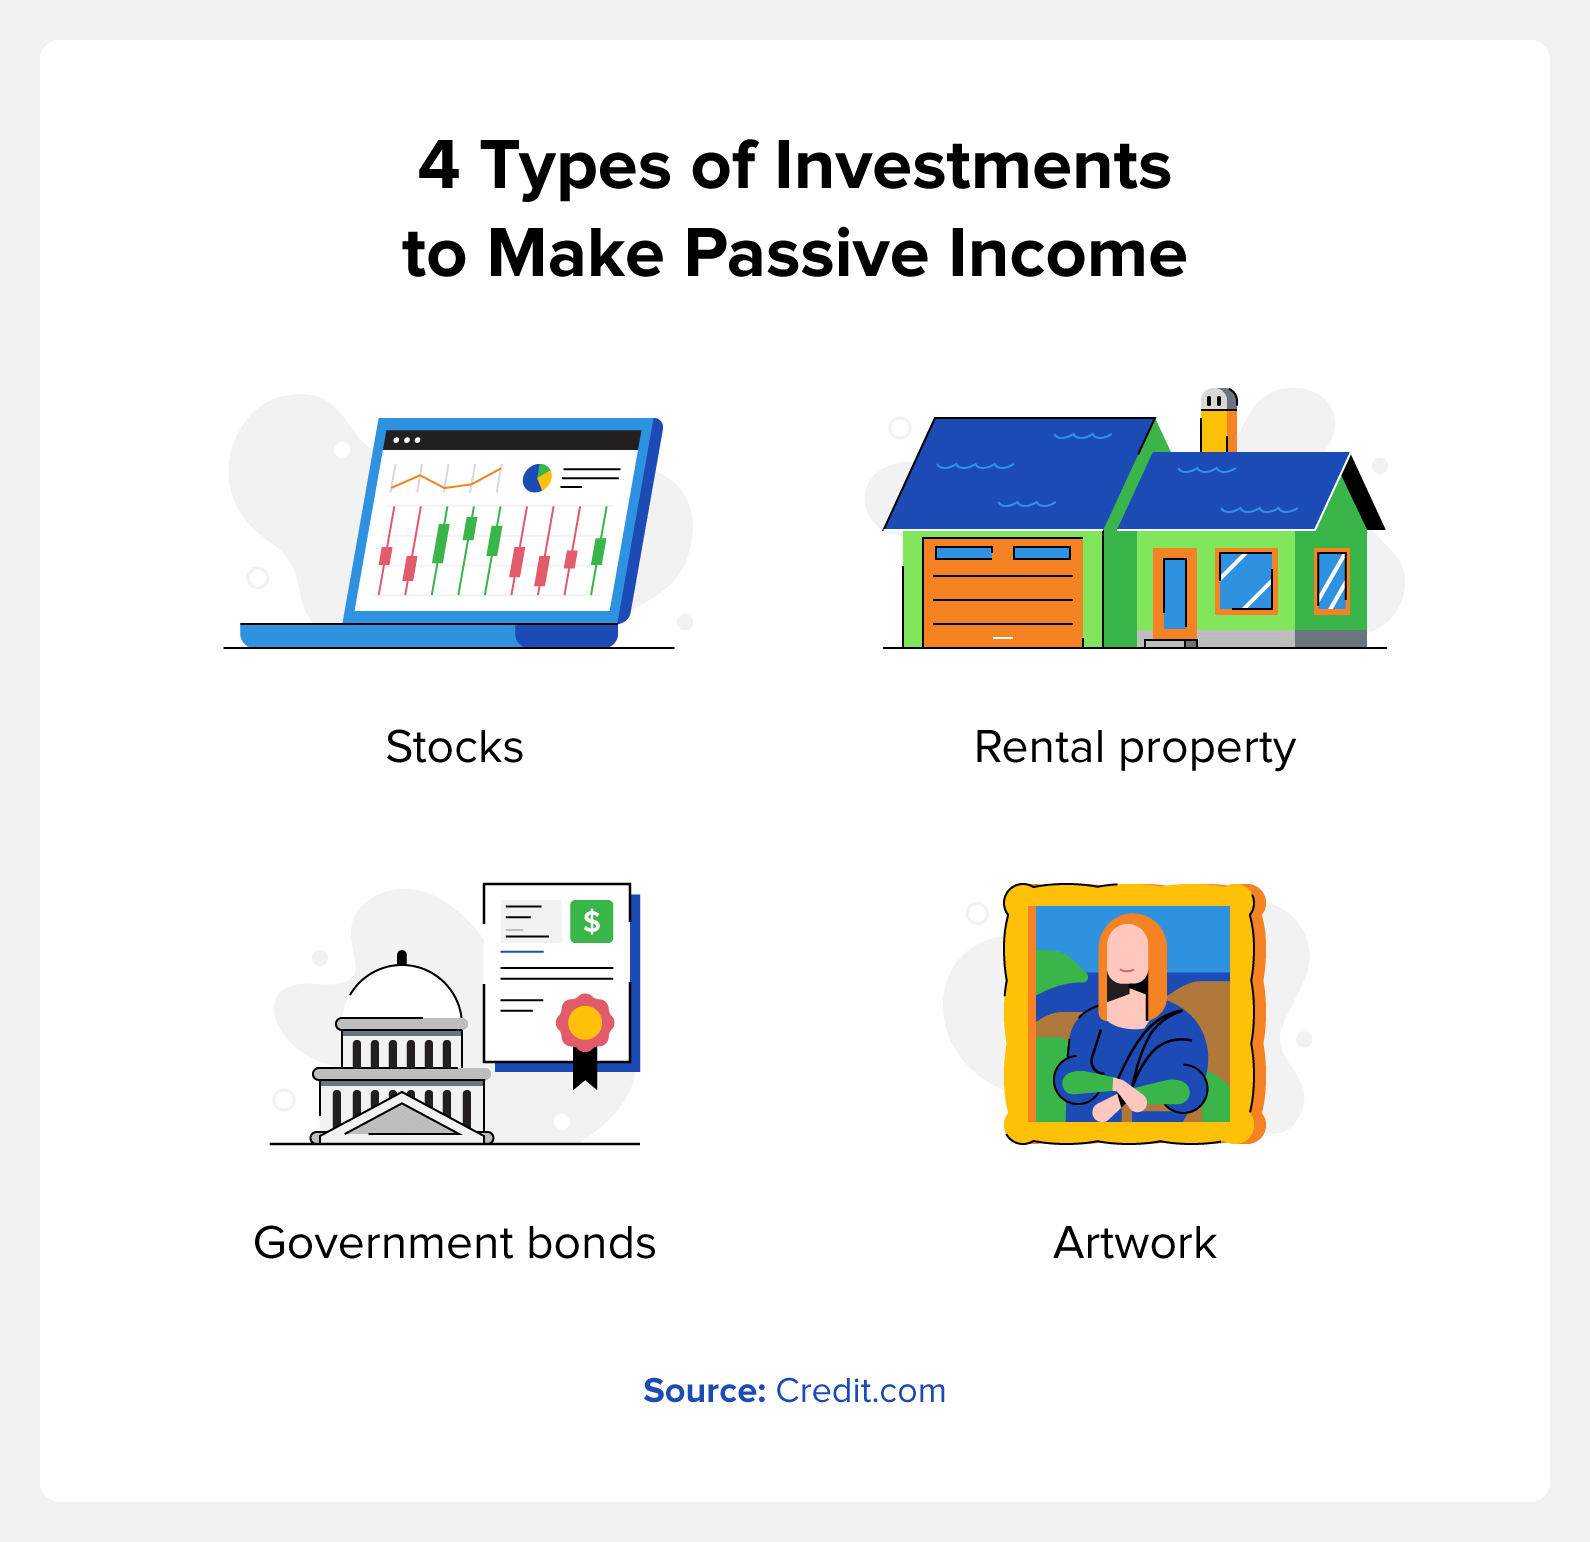 4 types of investments to make passive income